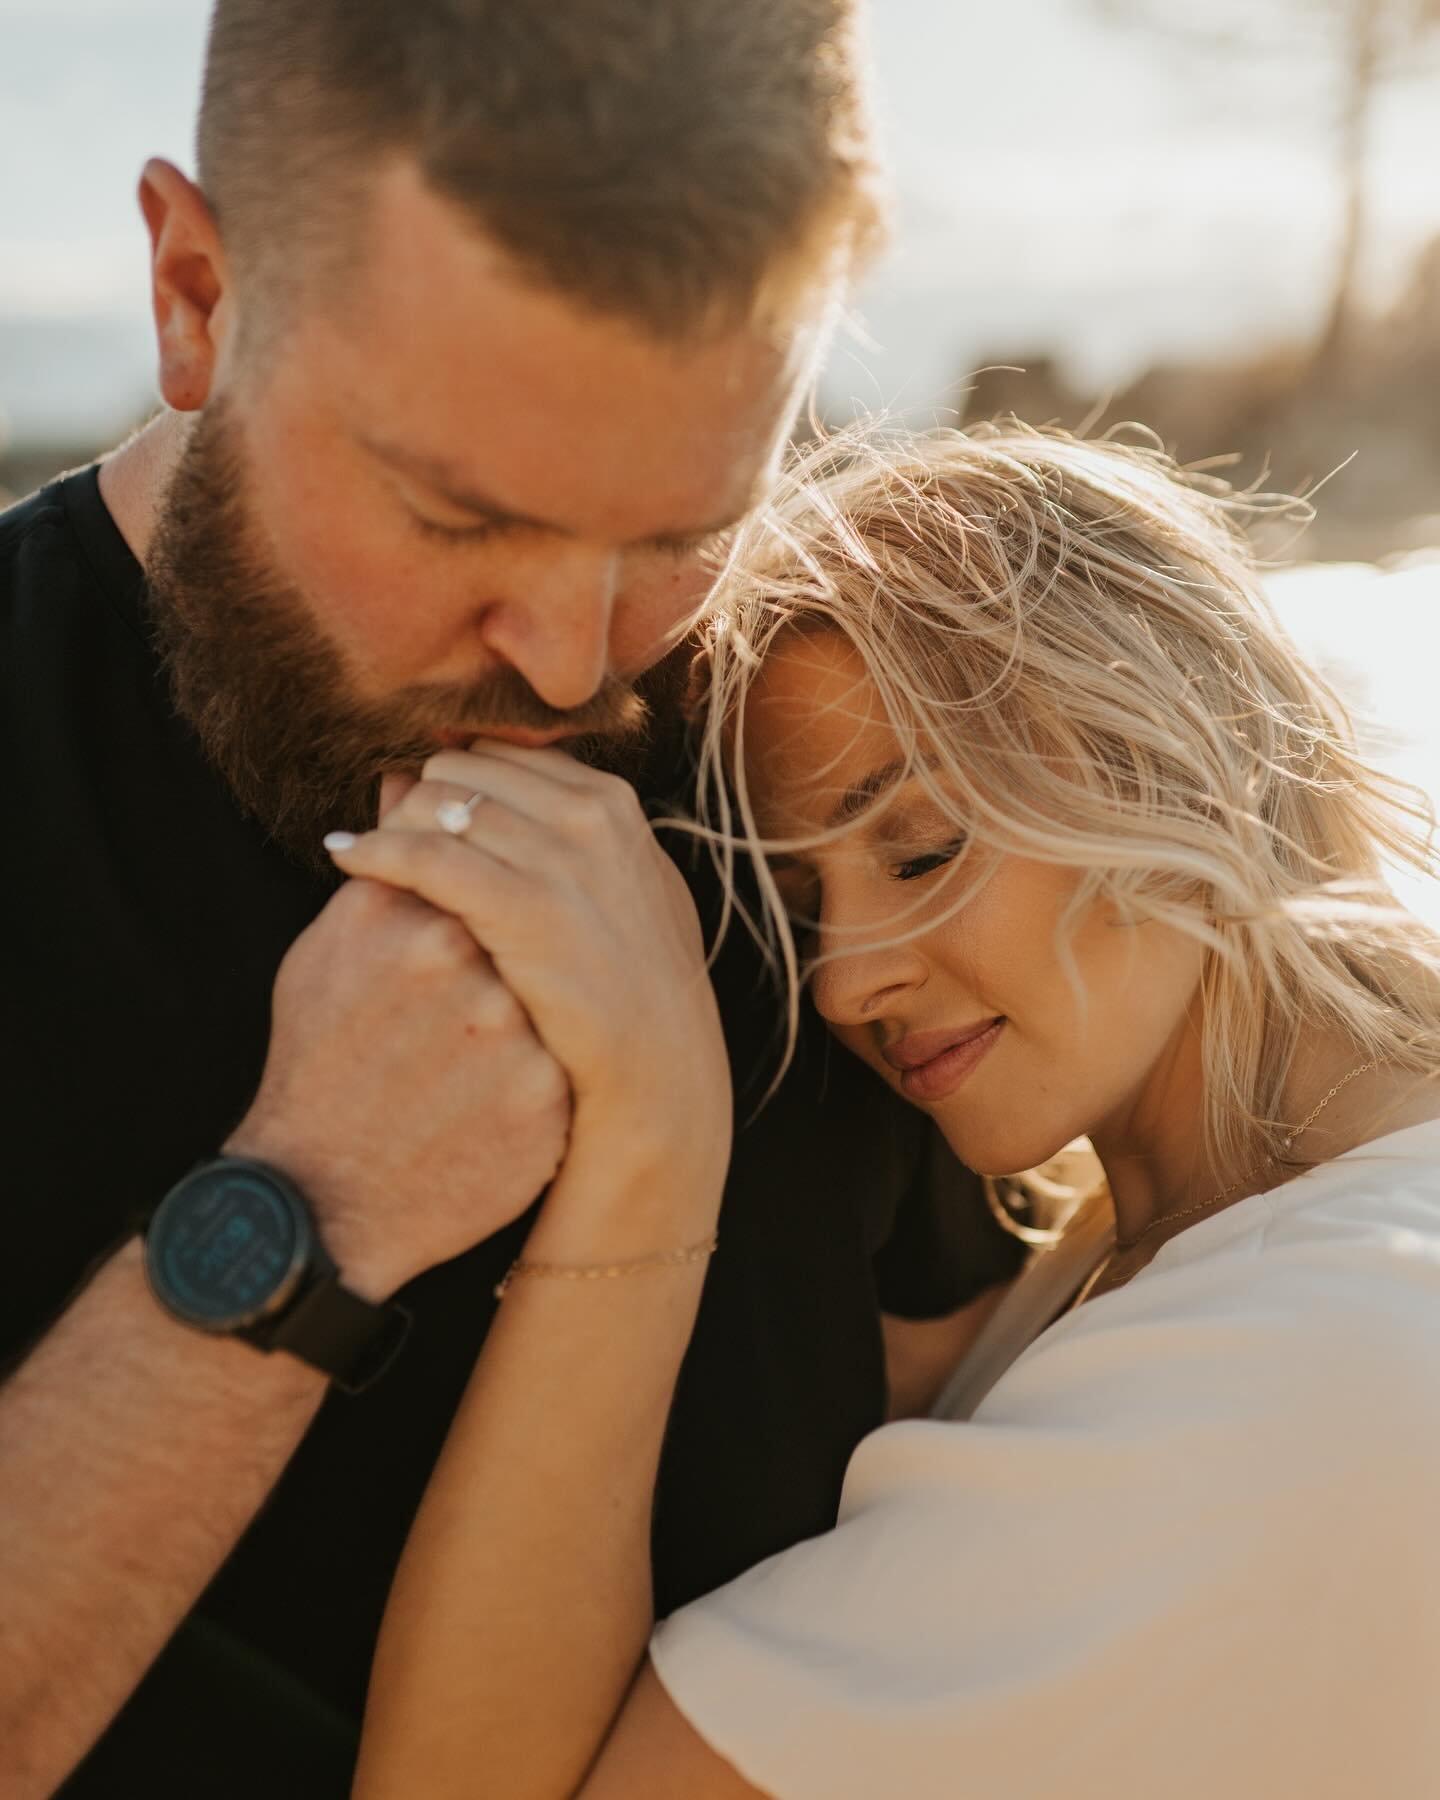 sitting in the airport omw to Mexico to get these two hitched! 💍😍 excited for the next few days soaking in the warm weather and getting to document their big day in a beautiful destination 🌴 see you guys soon 🤍